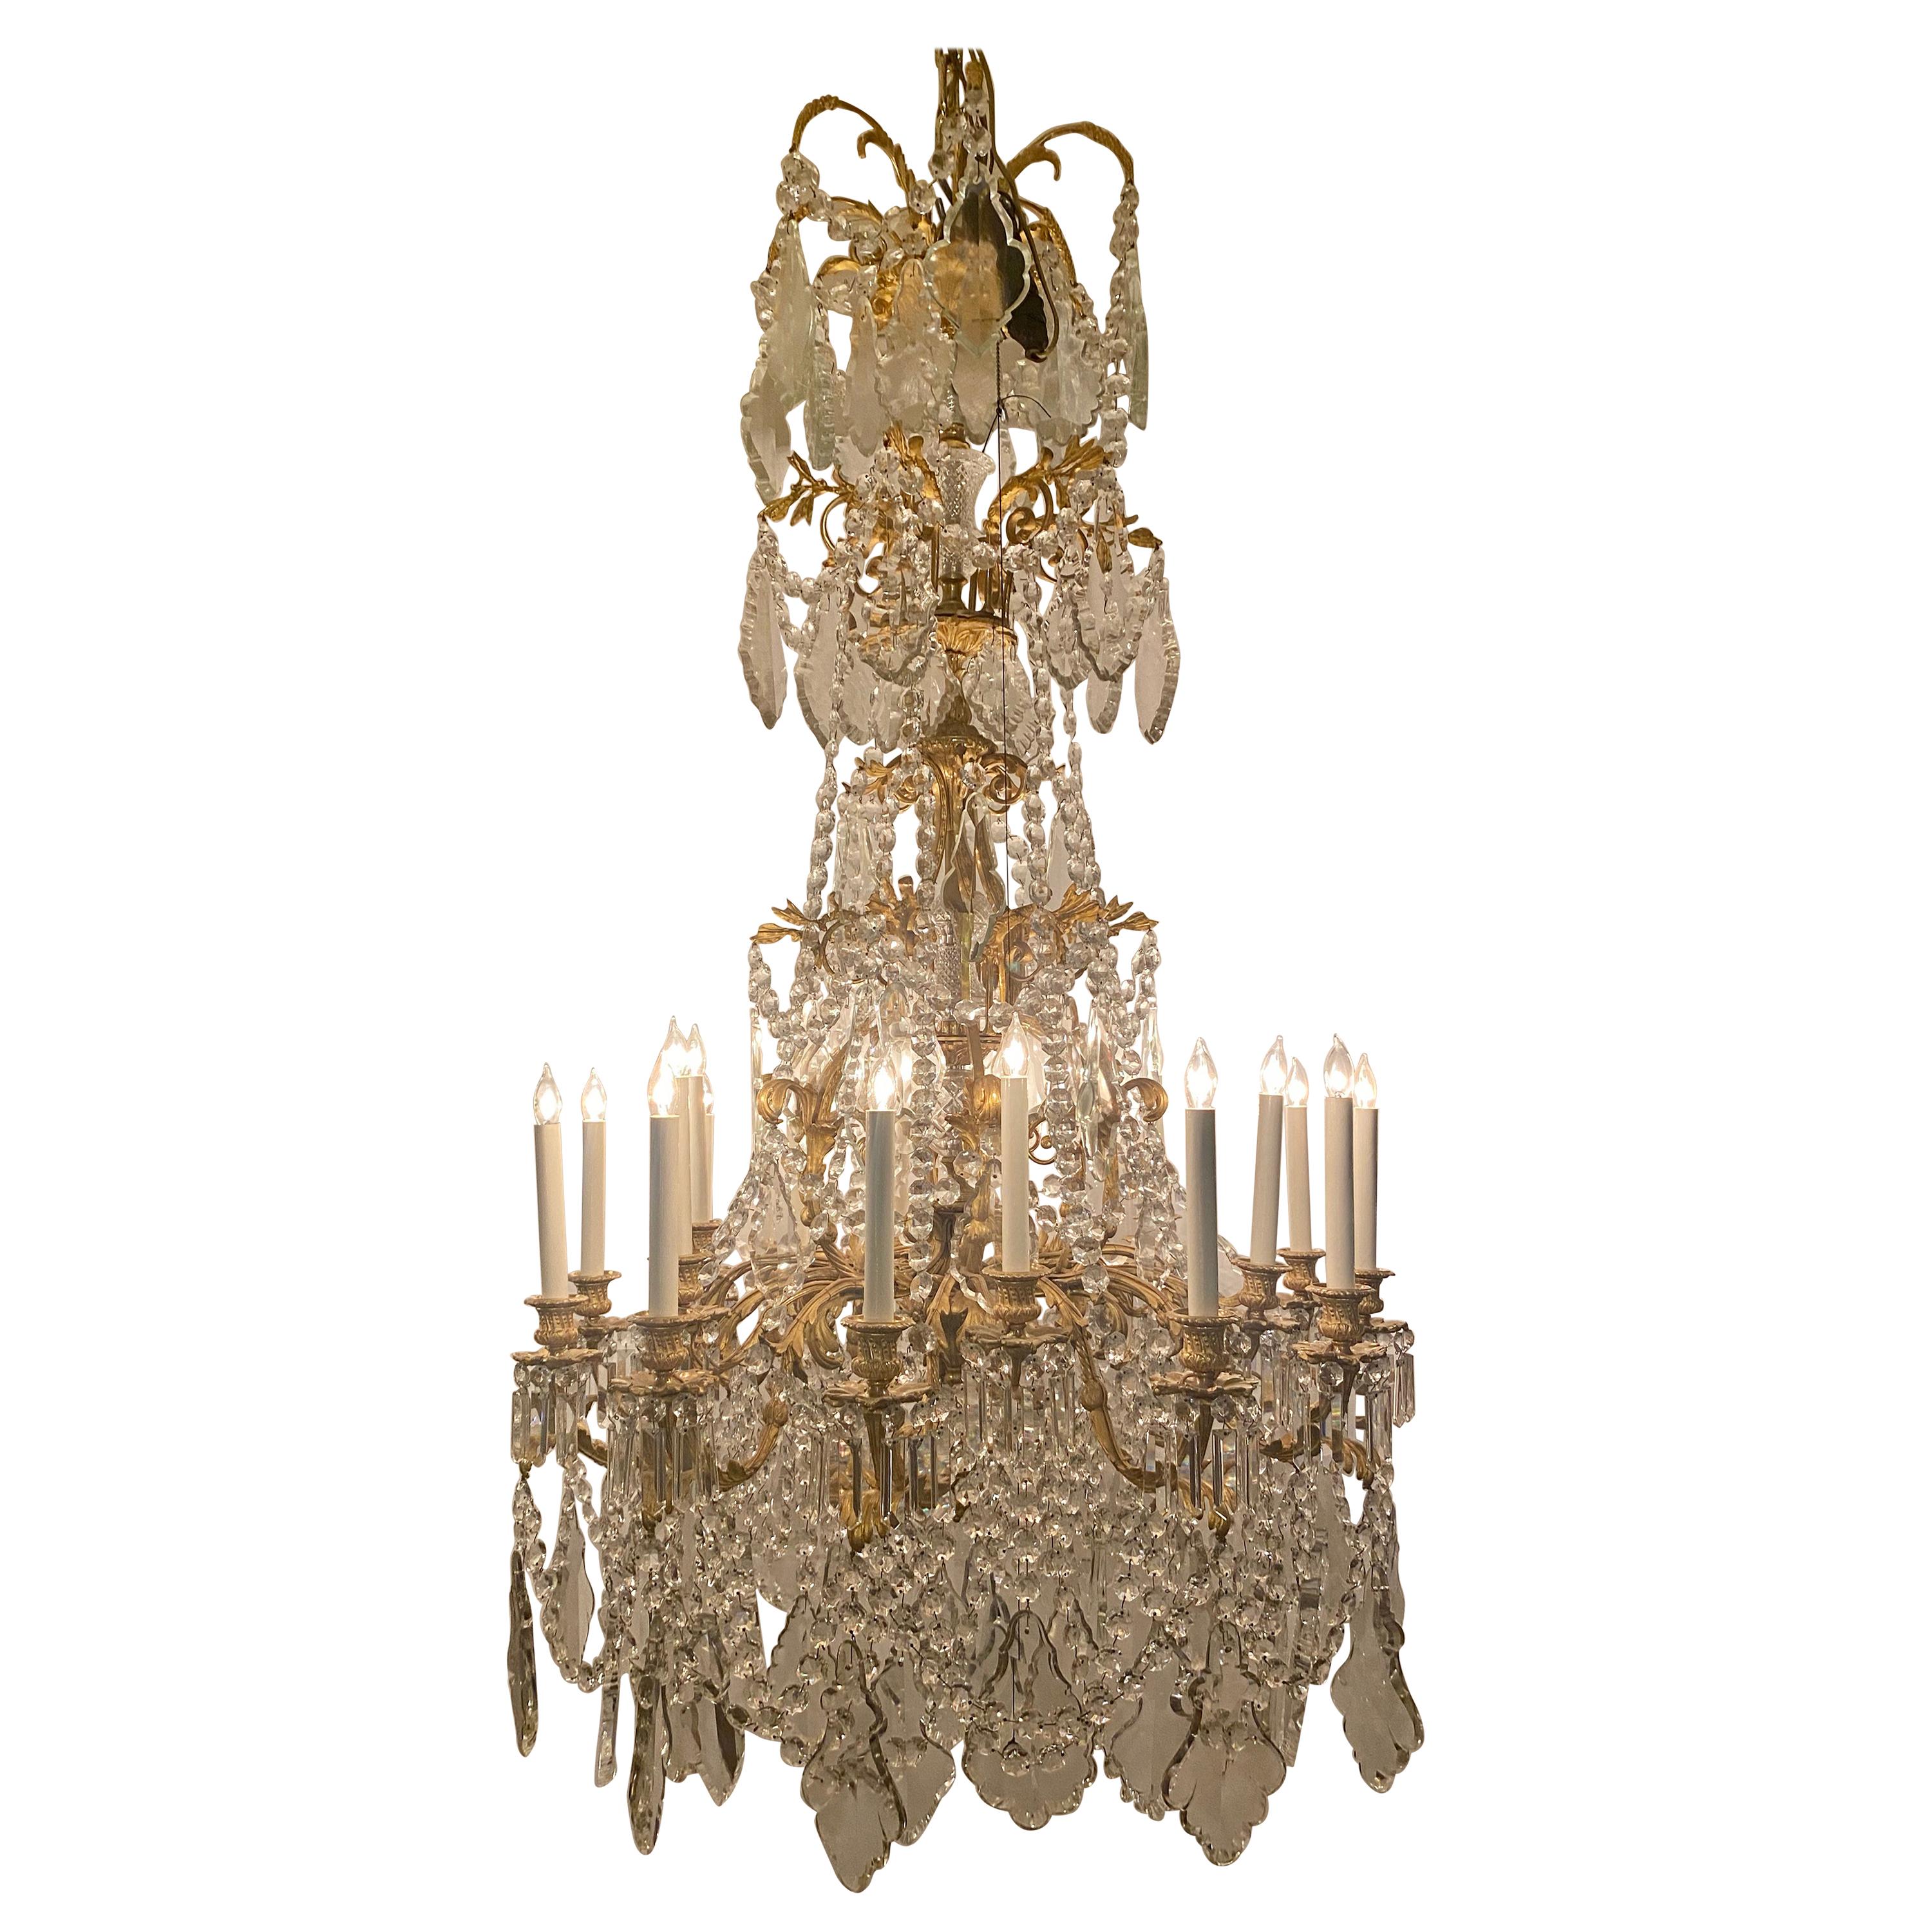 Antique French Napoleon III Baccarat Crystal & Gold Bronze Chandelier Circa 1870 For Sale